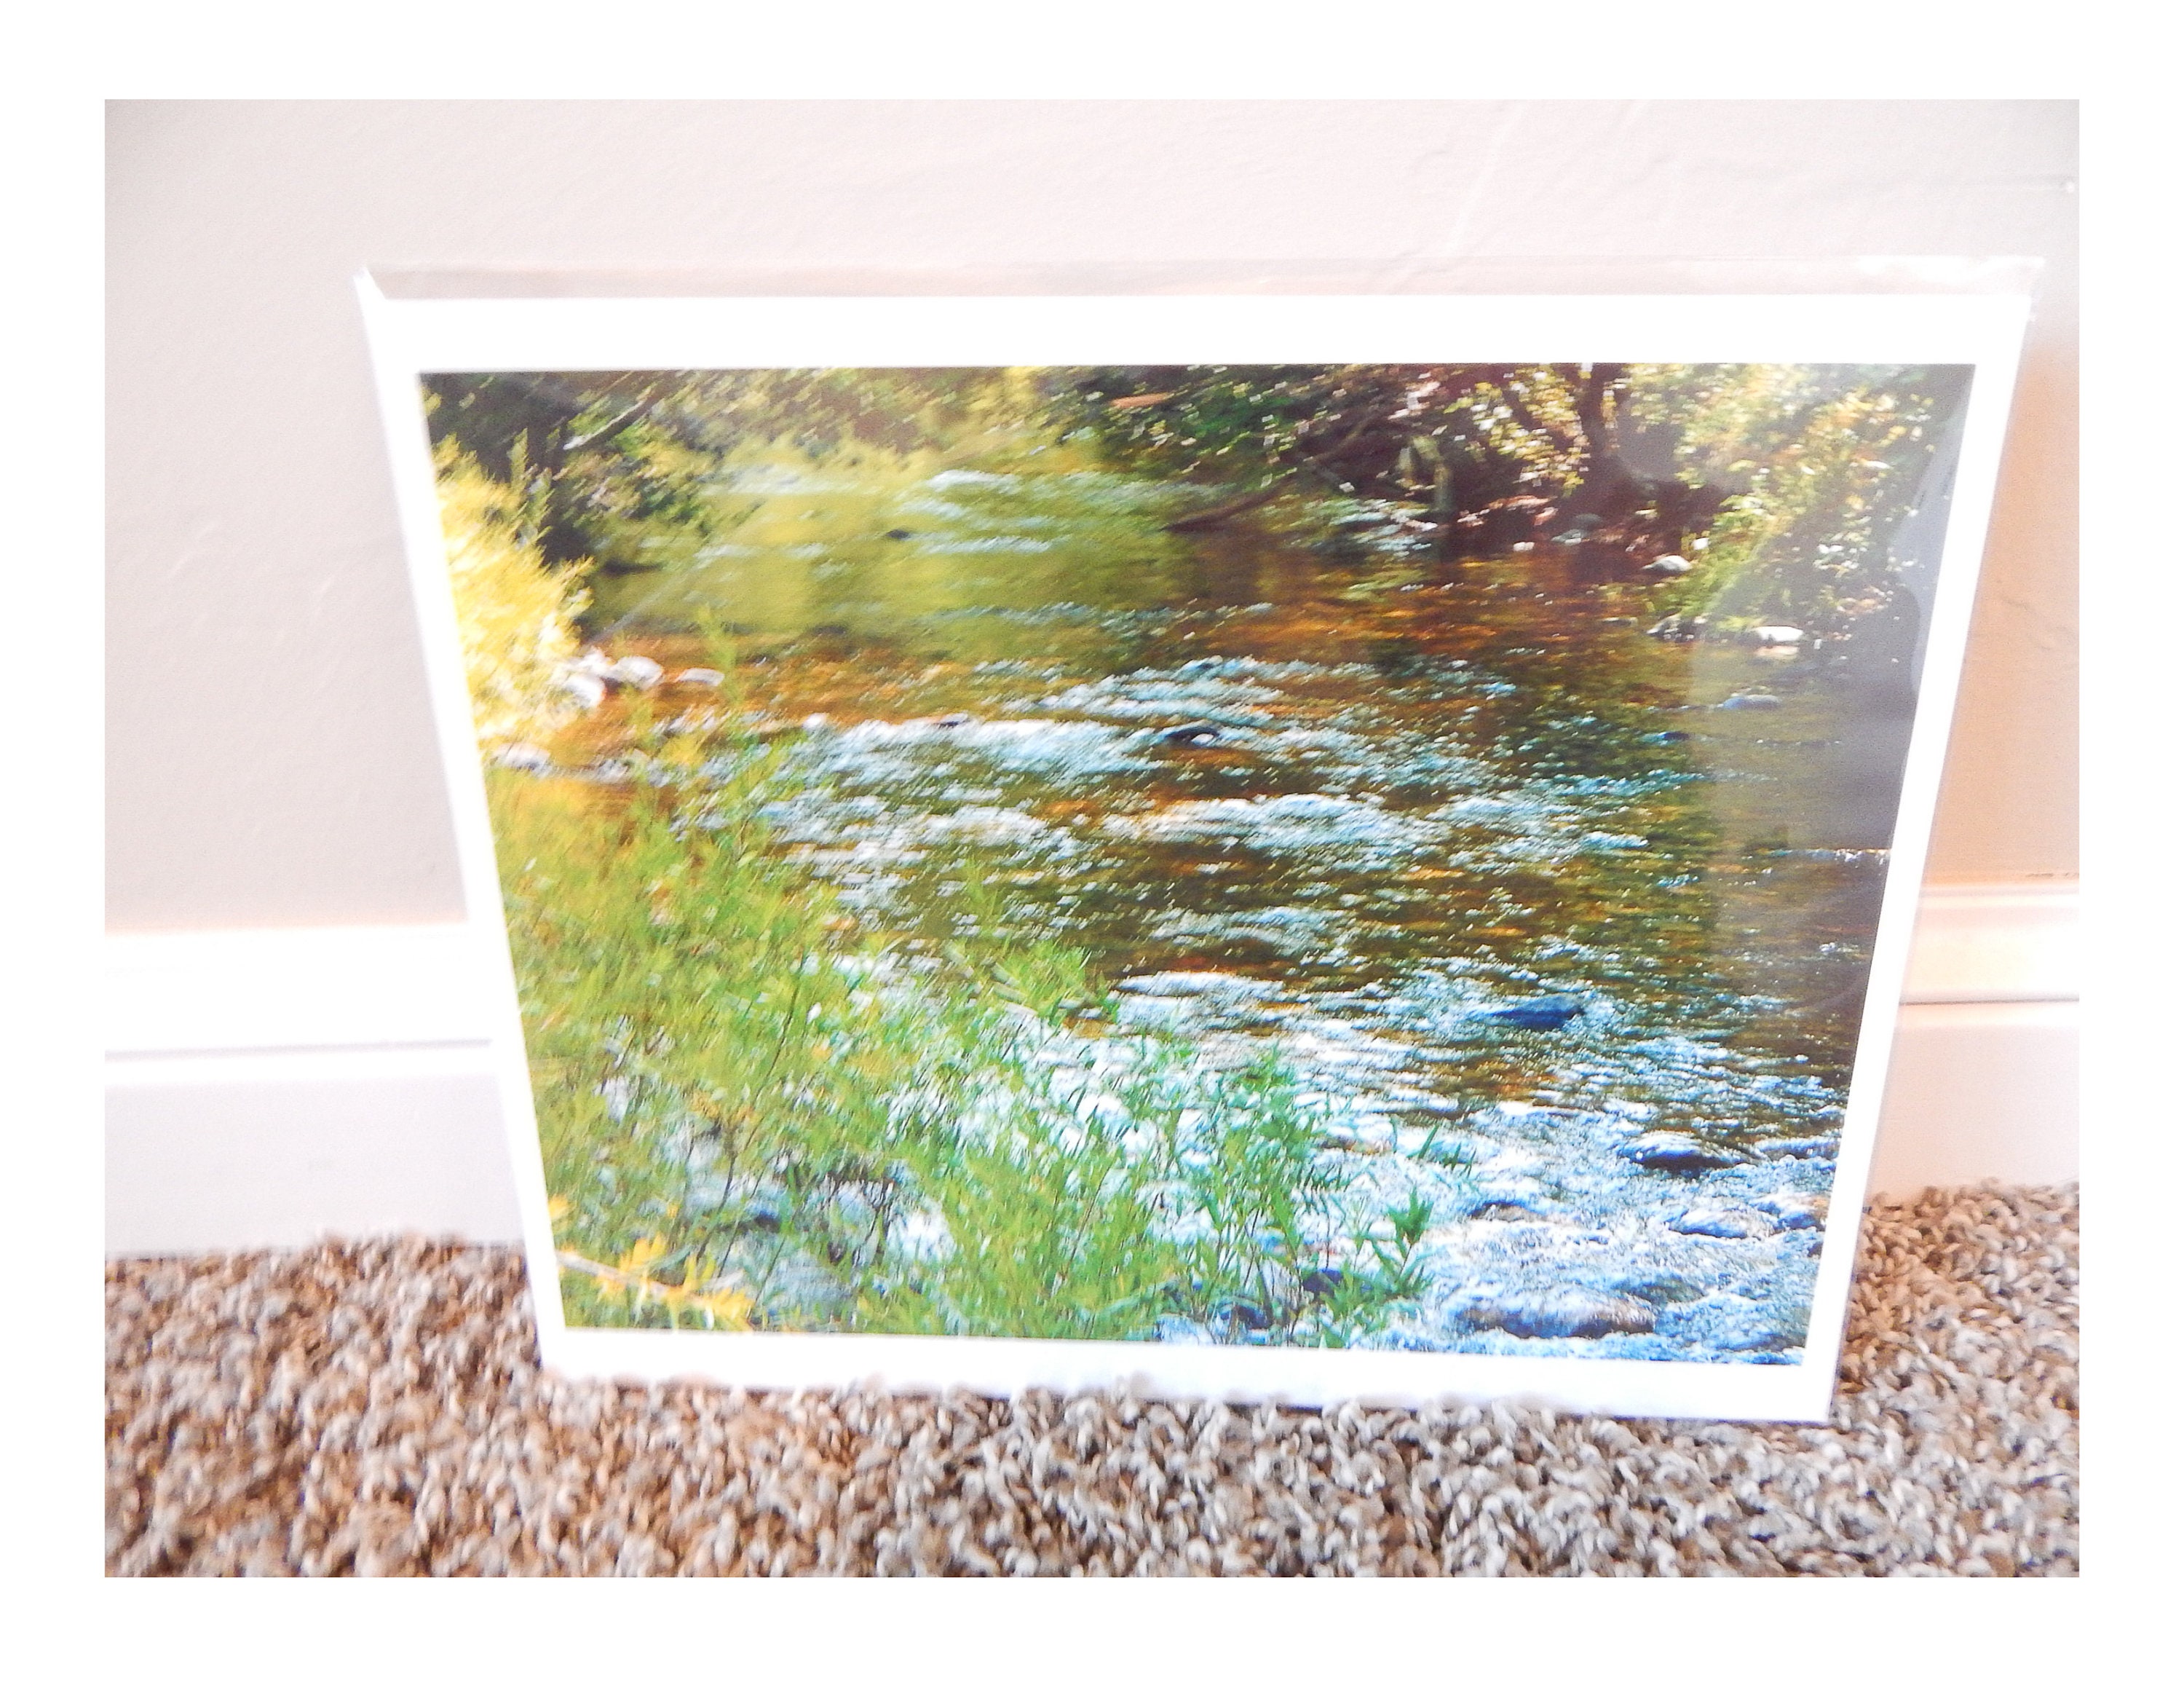 8x10 Digital Print Photo of a Clear Winding Stream Running Over Rocks and through the Woods Bubbling Stream